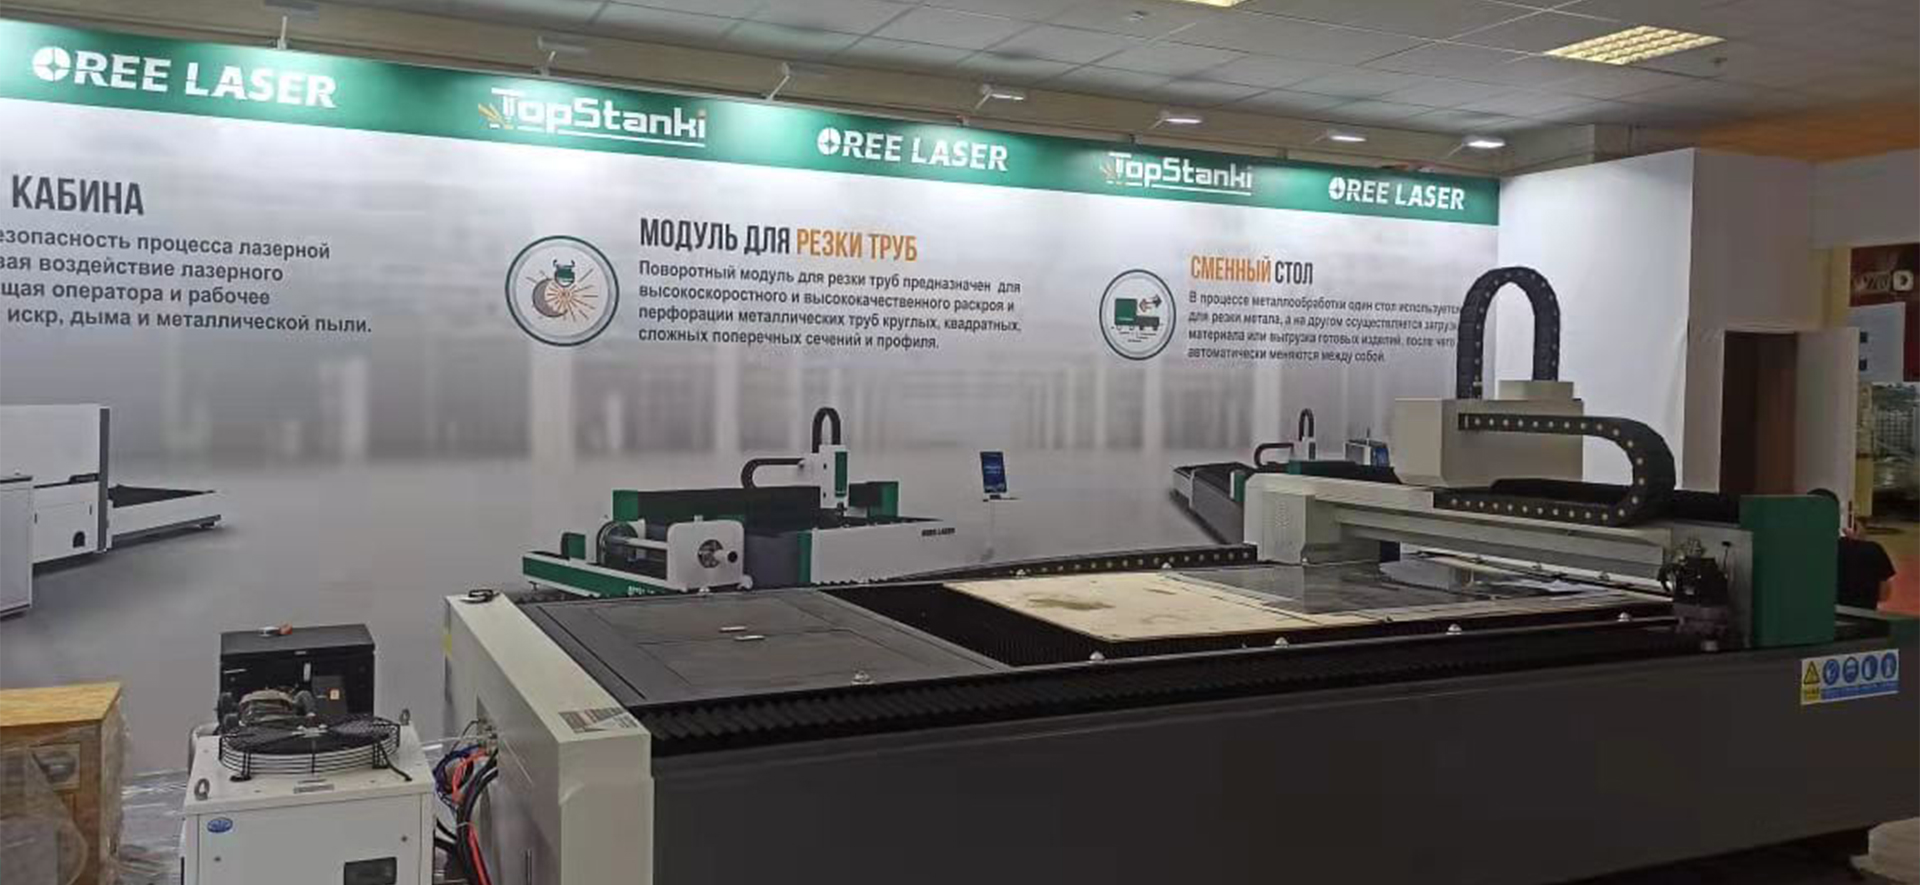 Oree Laser participate in the 21st Moscow Machine Tool and Metalworking Exhibition(图3)